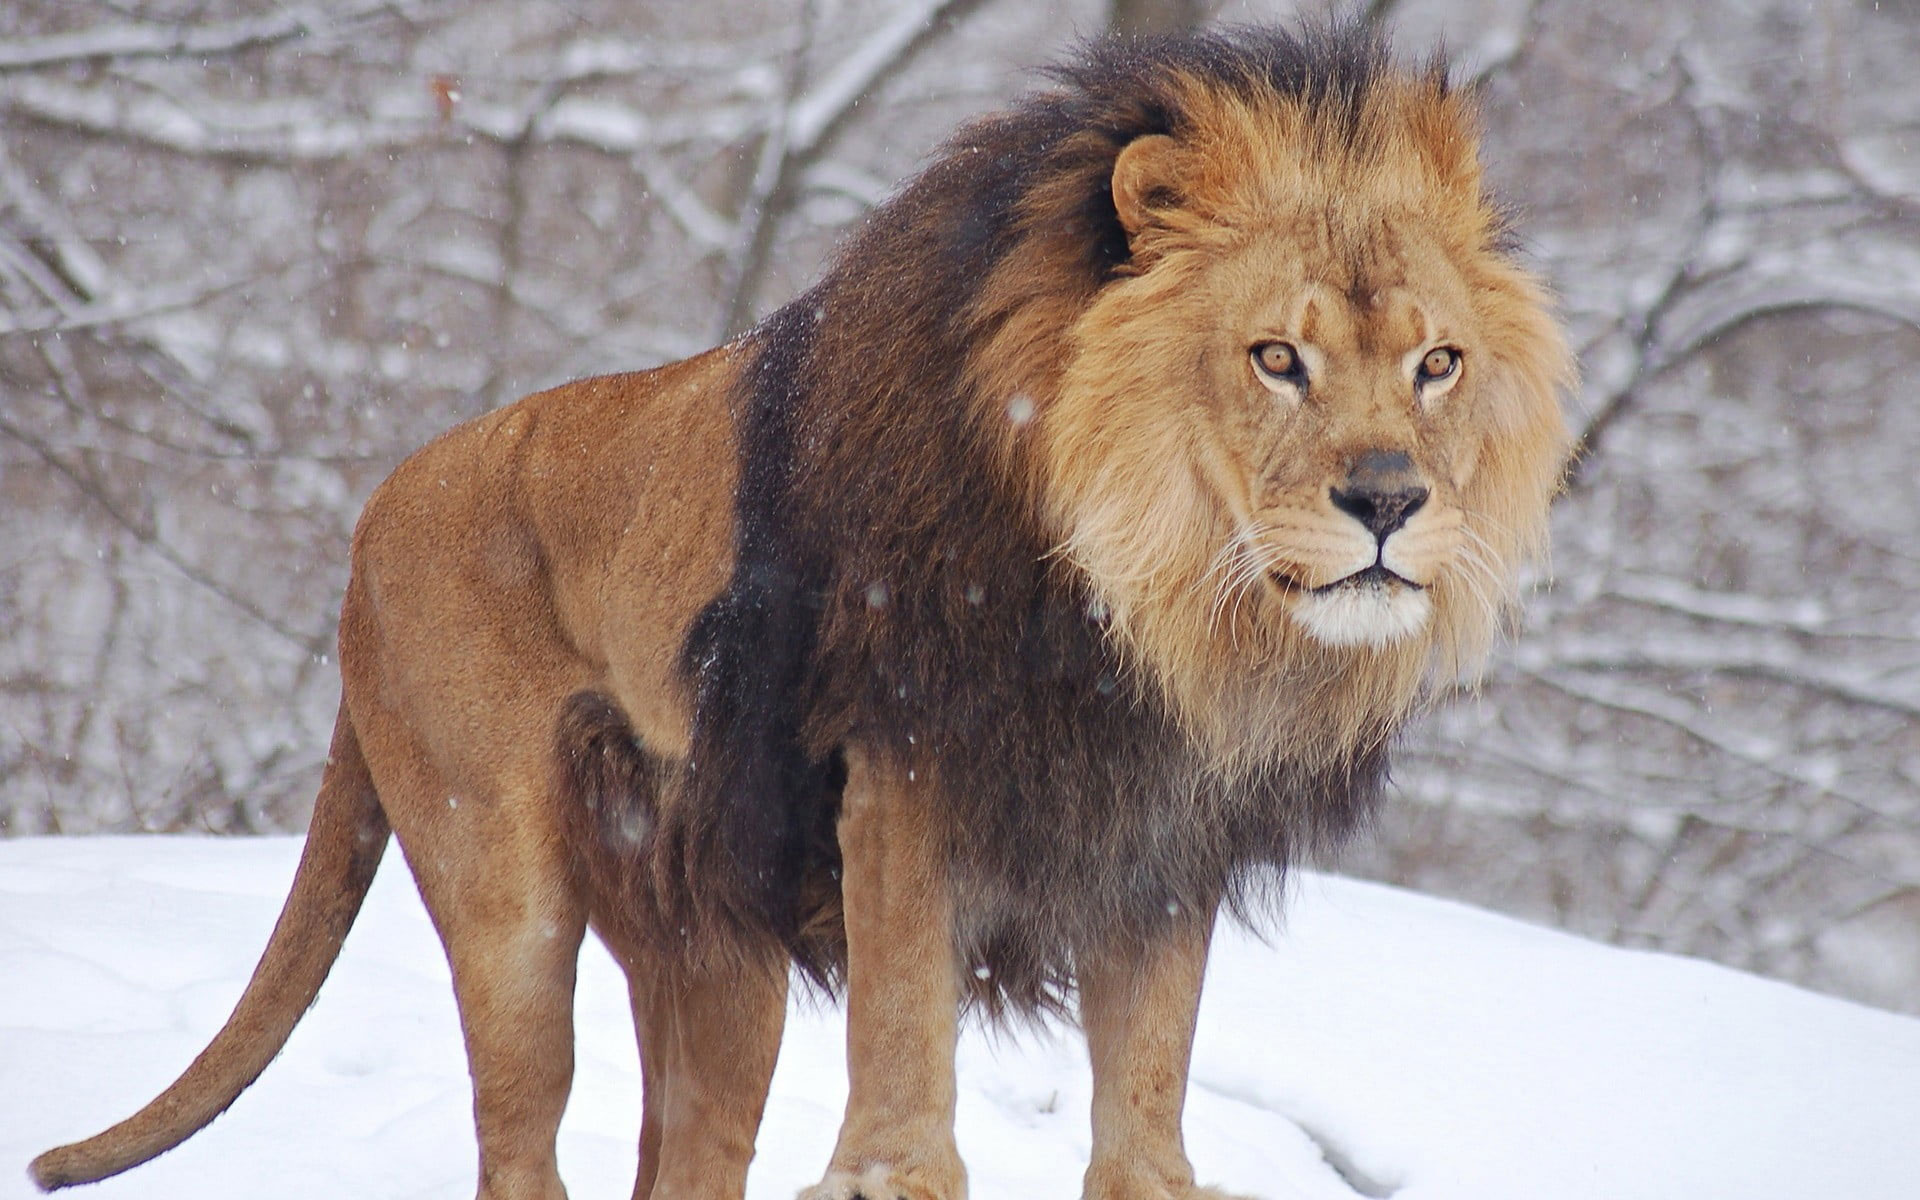 Brown and black lion wallpaper, animals, nature, snow, winter, cold temperature